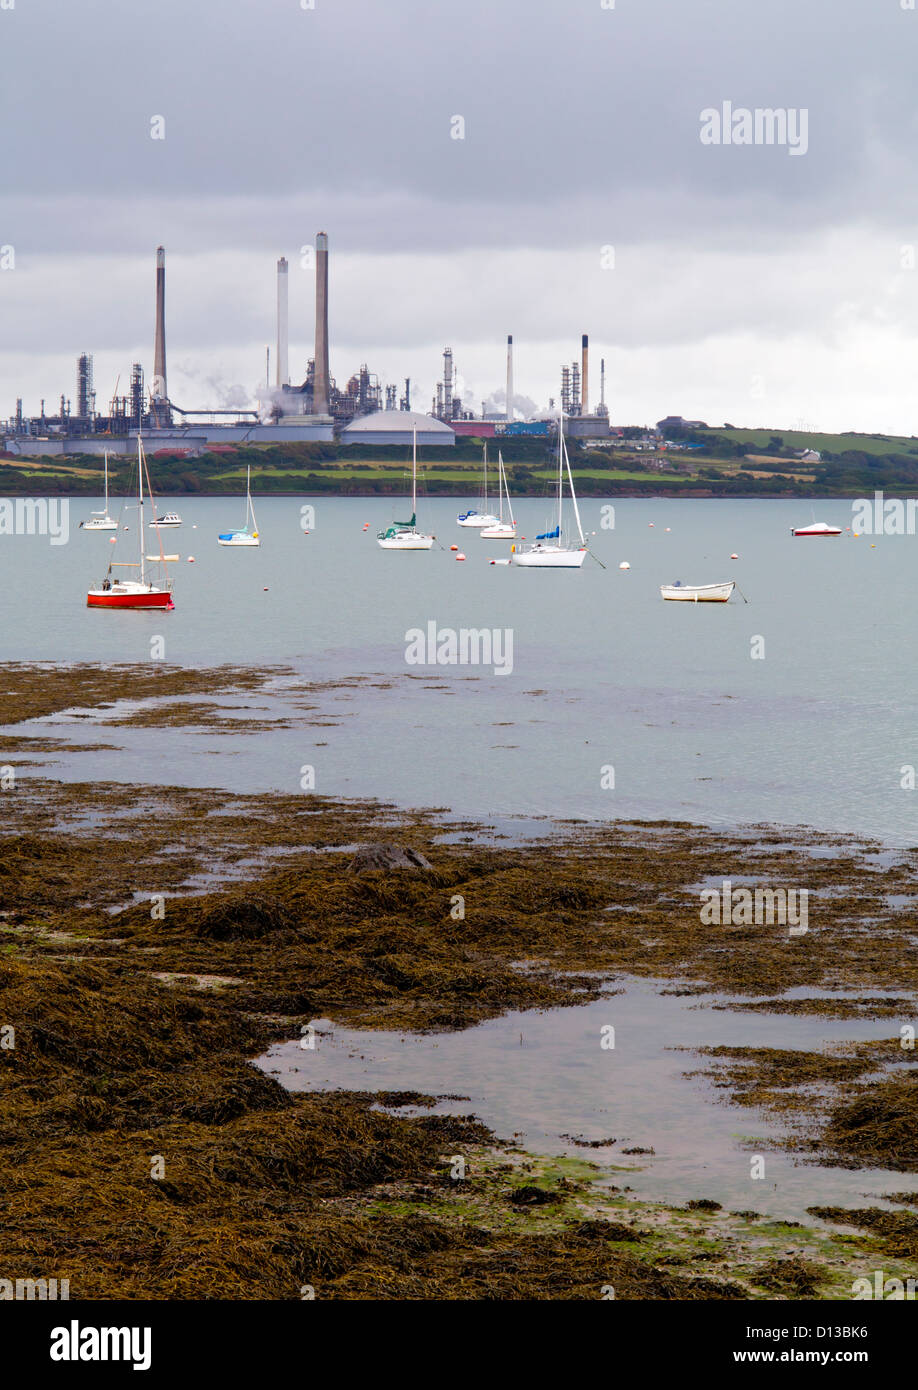 Milford Haven oil refinery and LNG terminal viewed across the estuary from Angle in Pembrokeshire South Wales UK Stock Photo